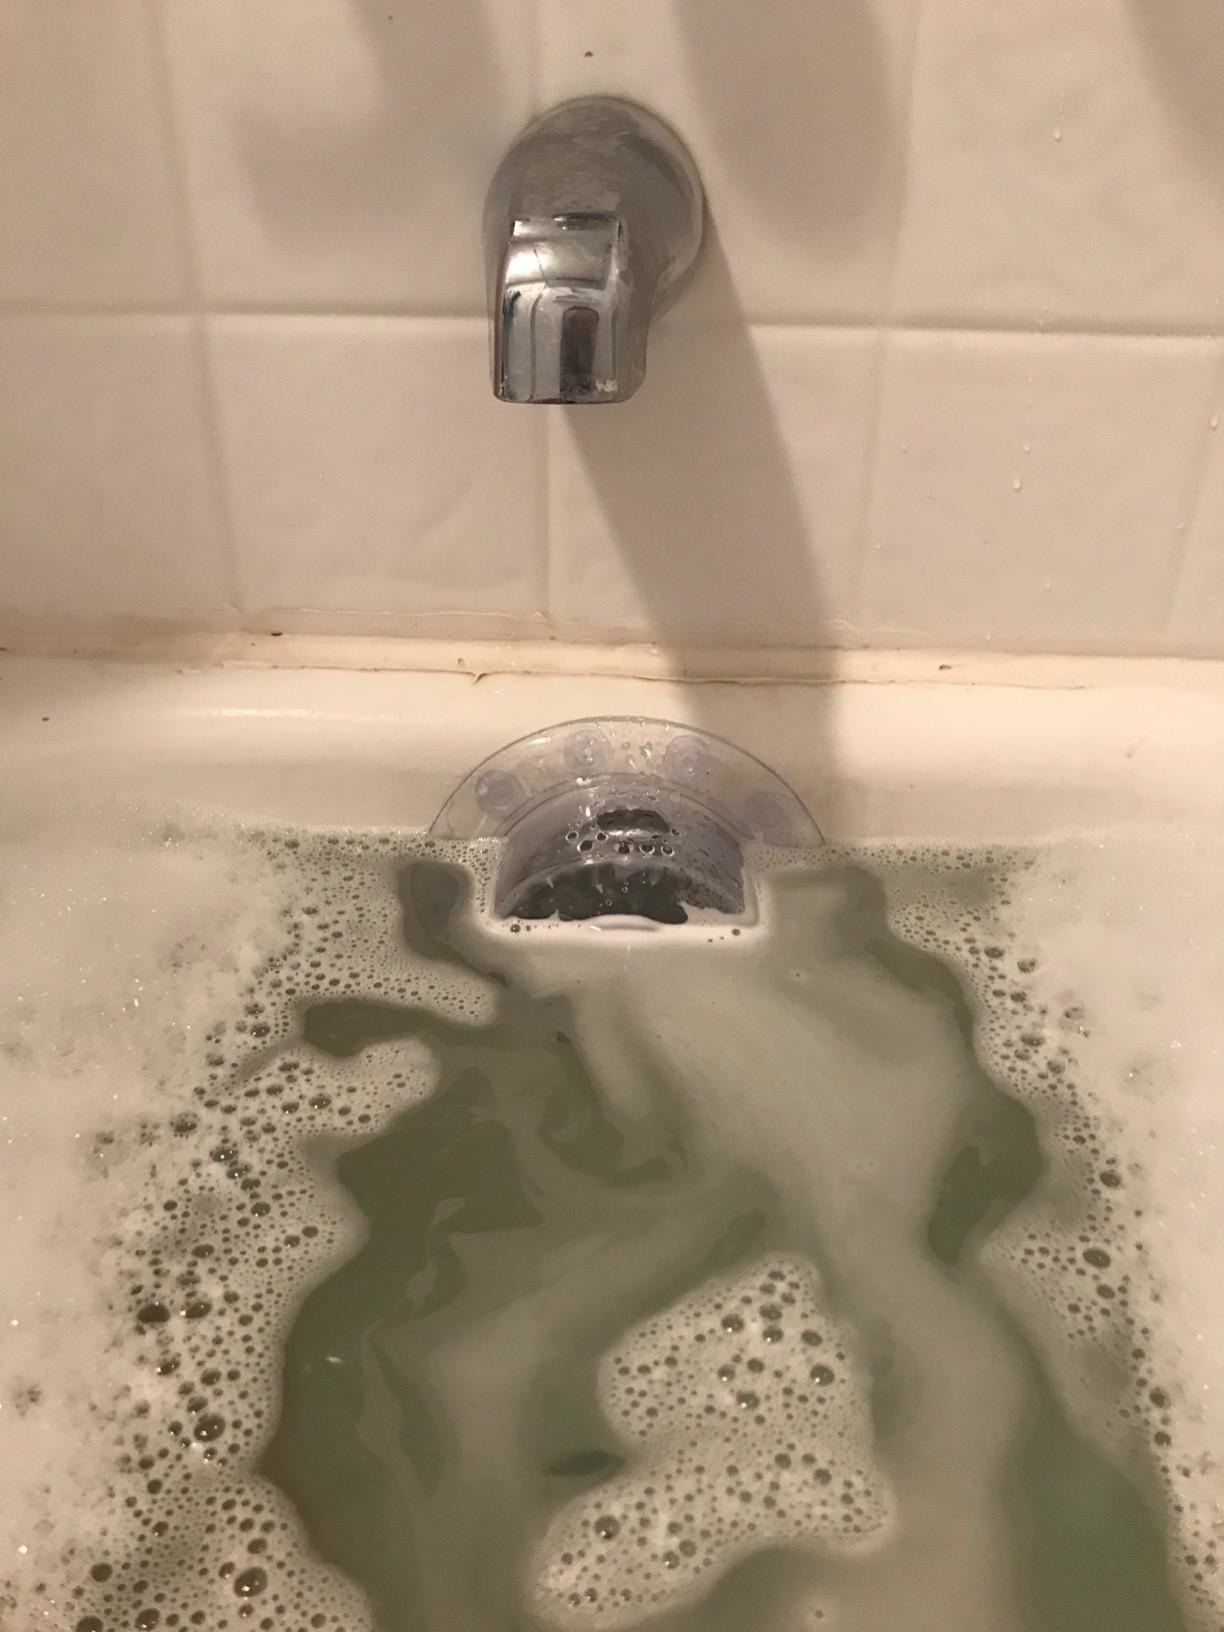 The cover in its place in a bubble bath